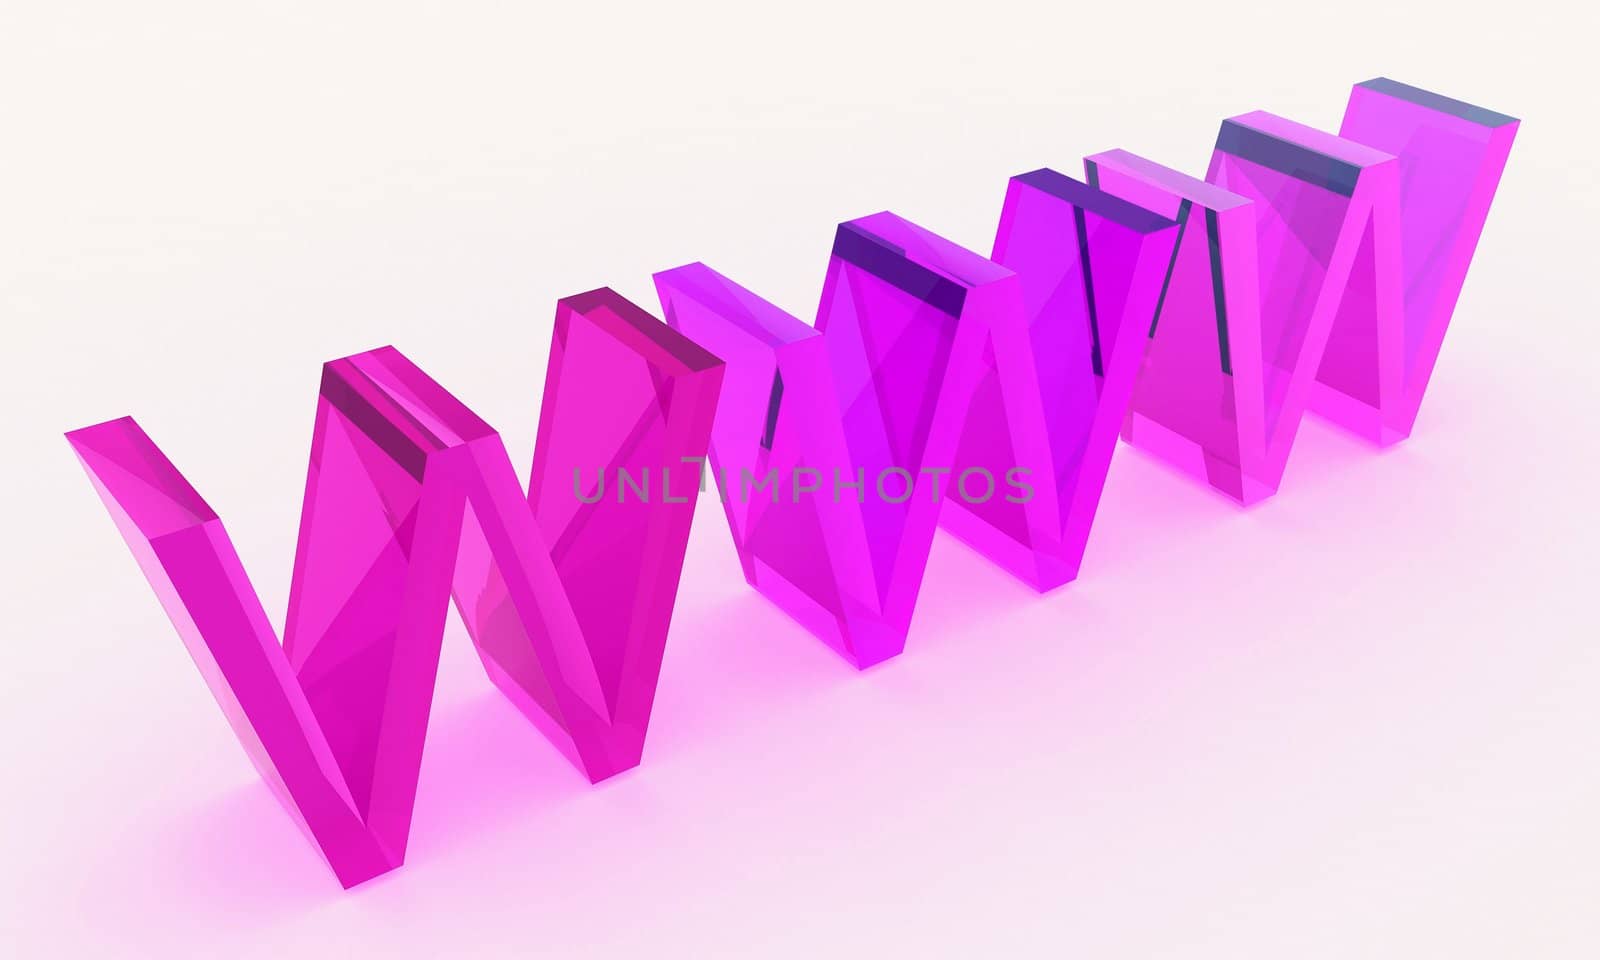 Rendered 3D WWW text made of glass in pink color scheme
